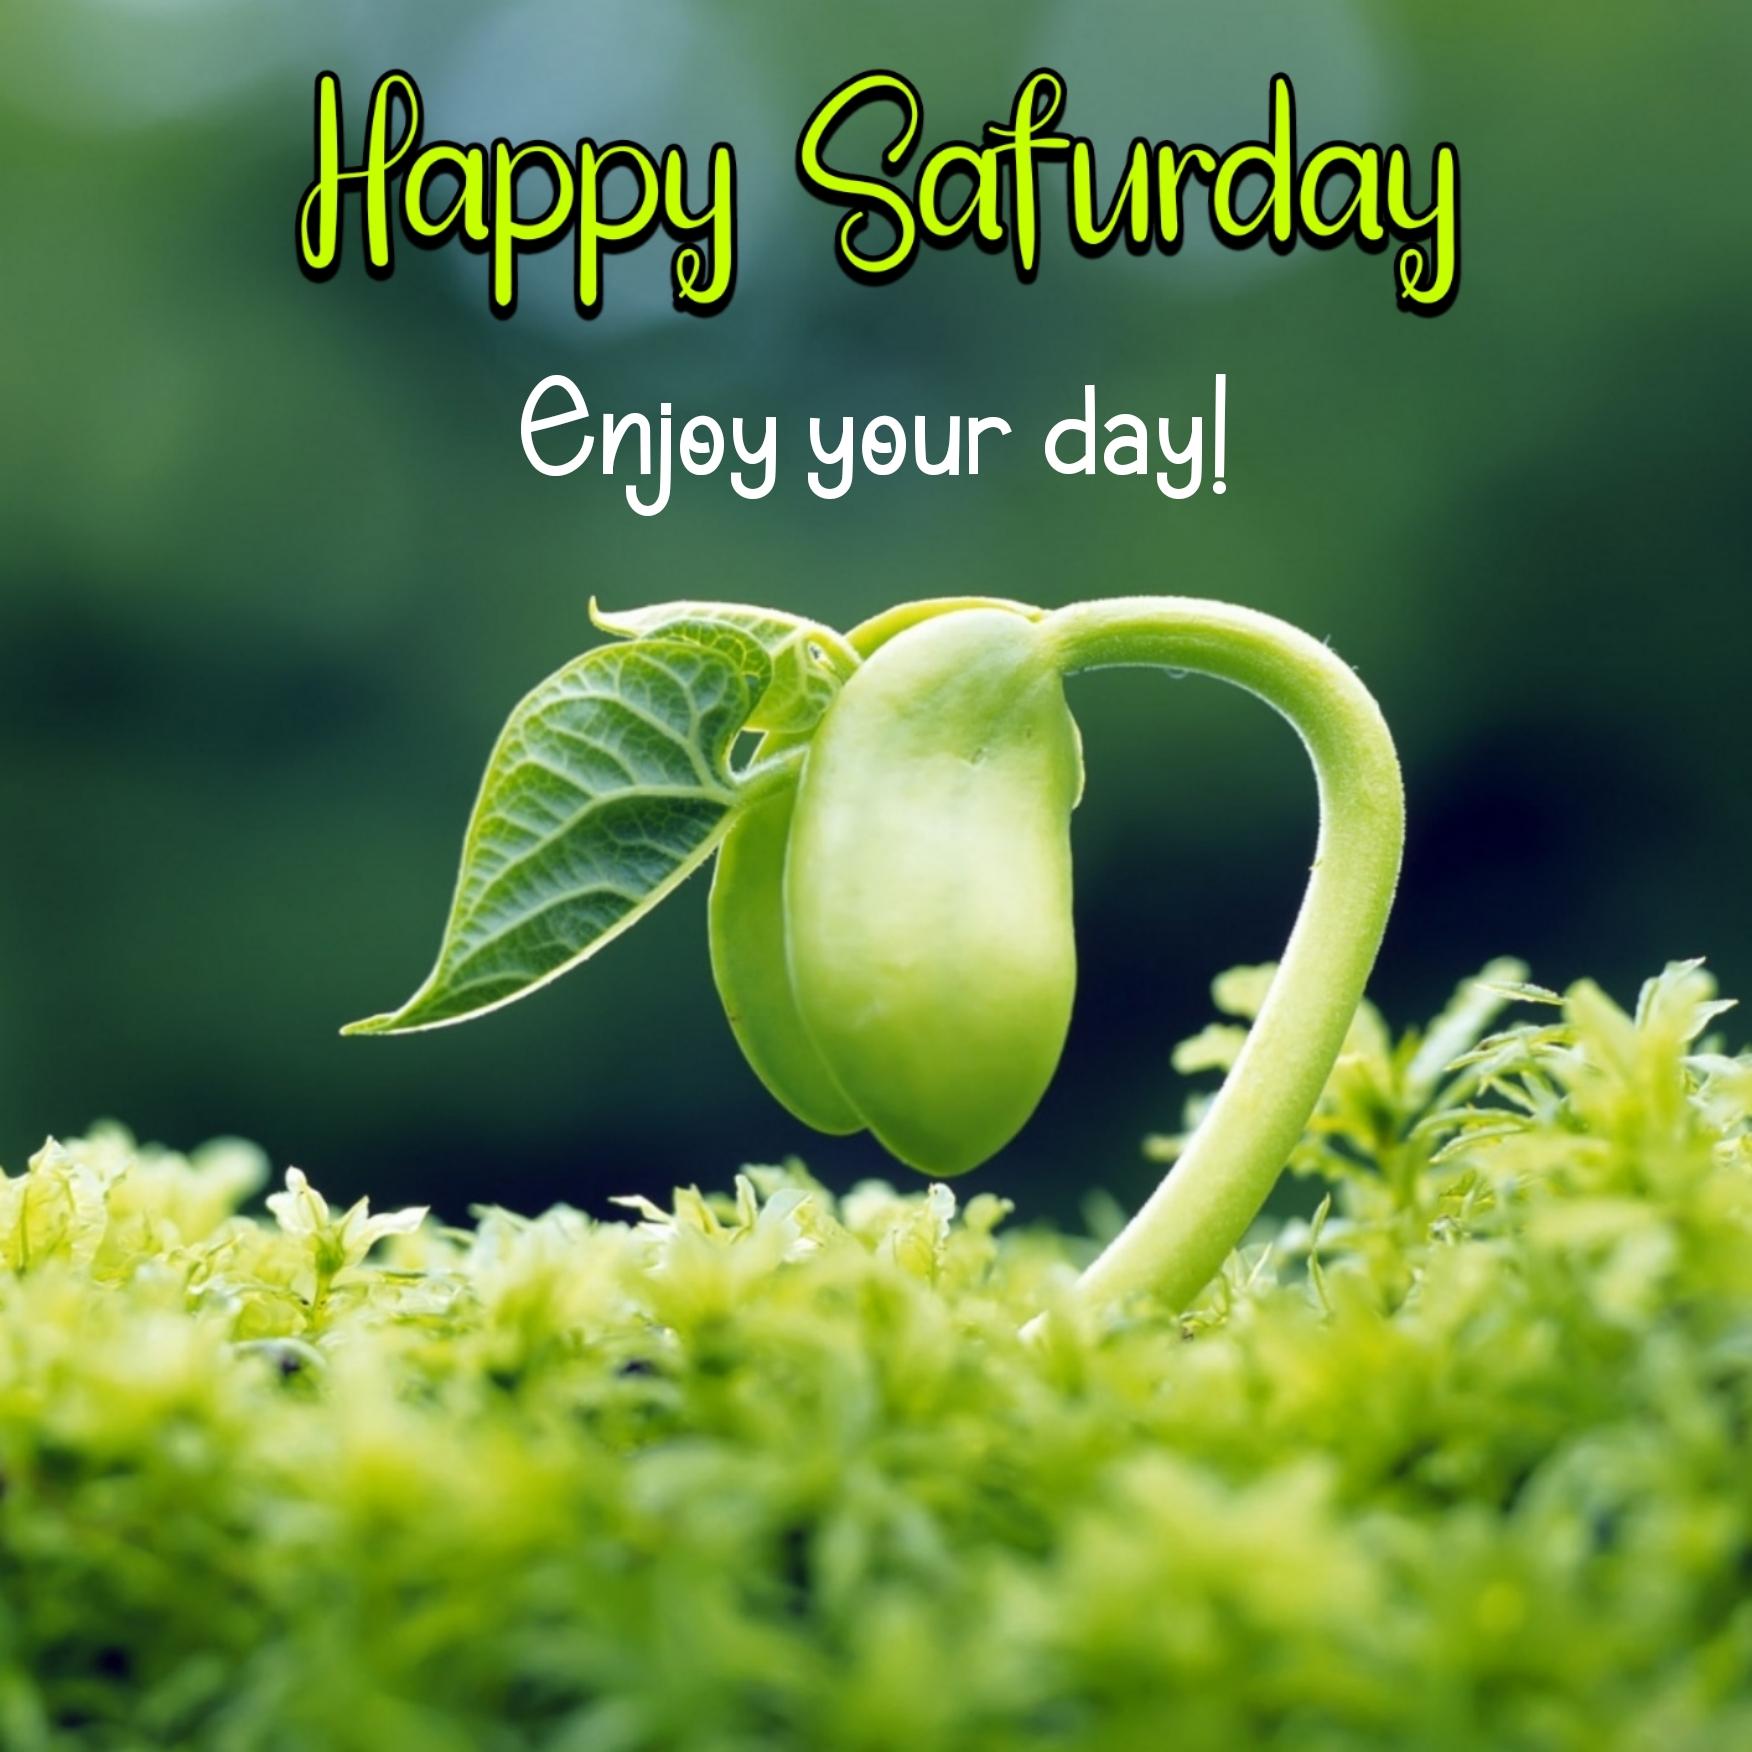 Happy Saturday Enjoy Your Day Images